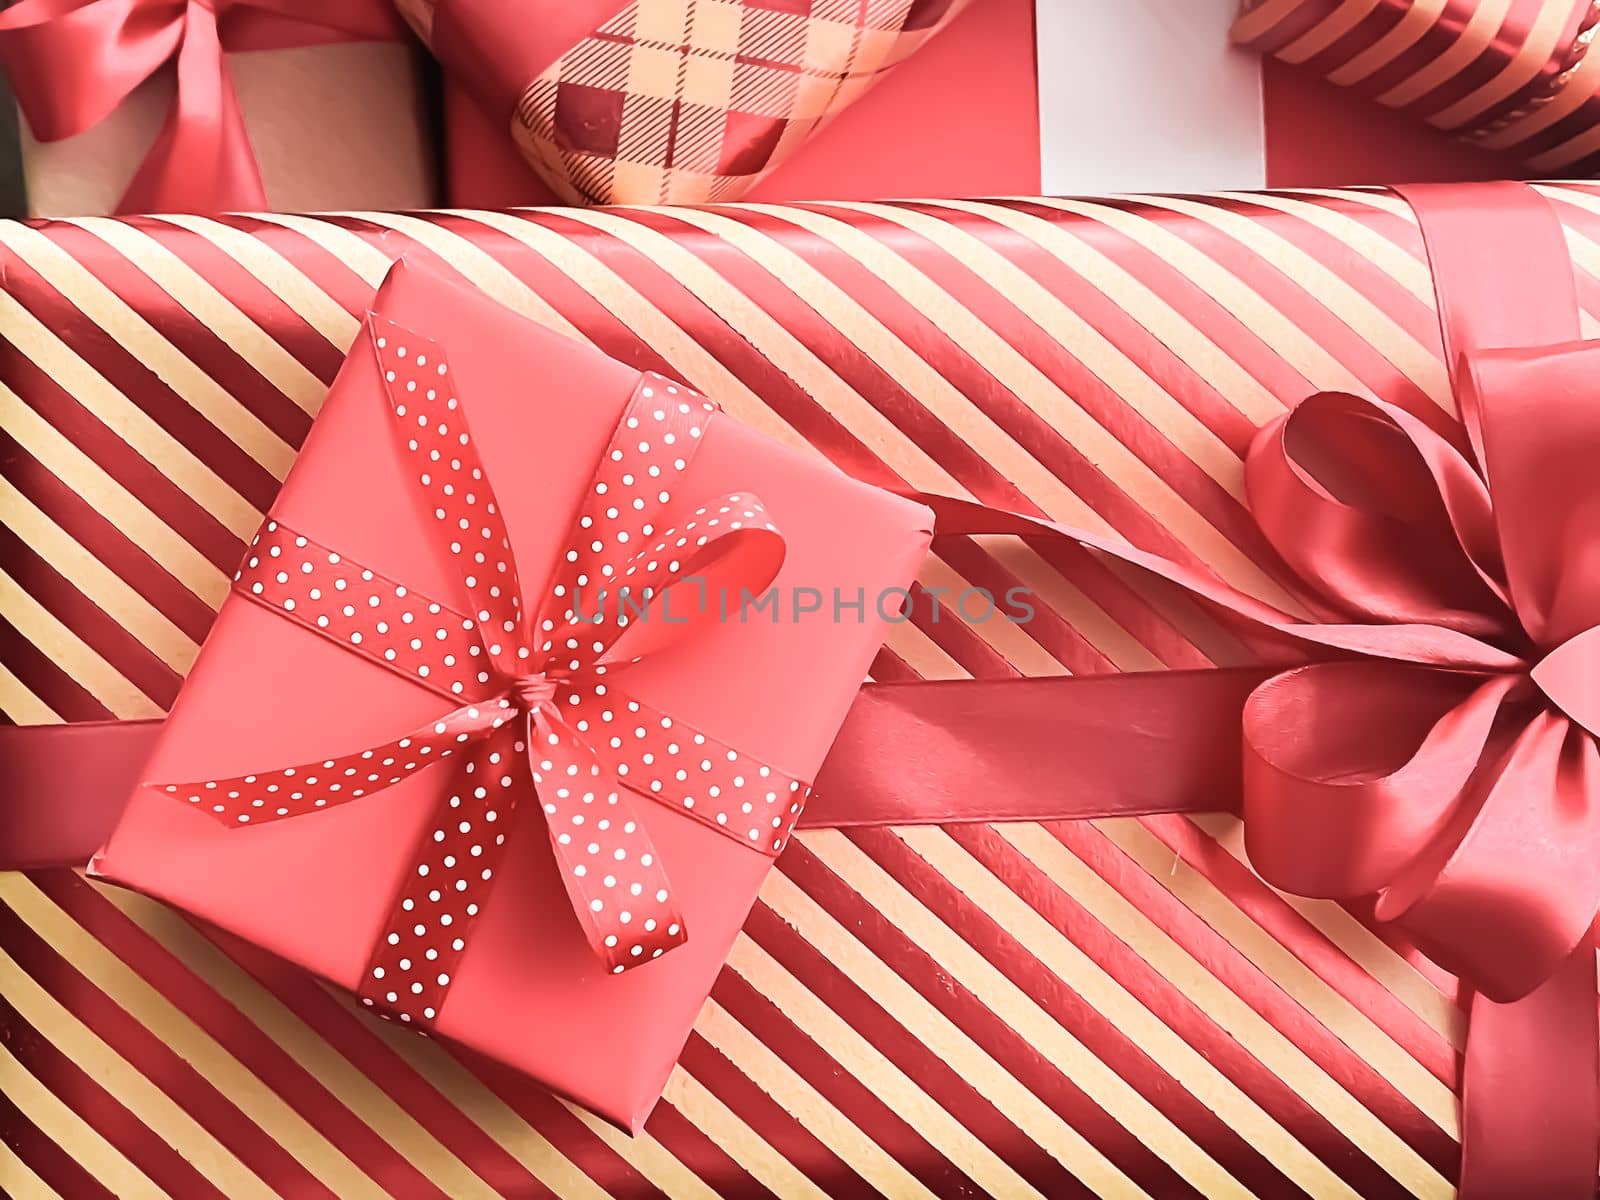 Holiday gifts and wrapped luxury presents, coral gift boxes as surprise present for birthday, Christmas, New Year, Valentines Day, boxing day, wedding and holidays shopping or beauty box delivery concept